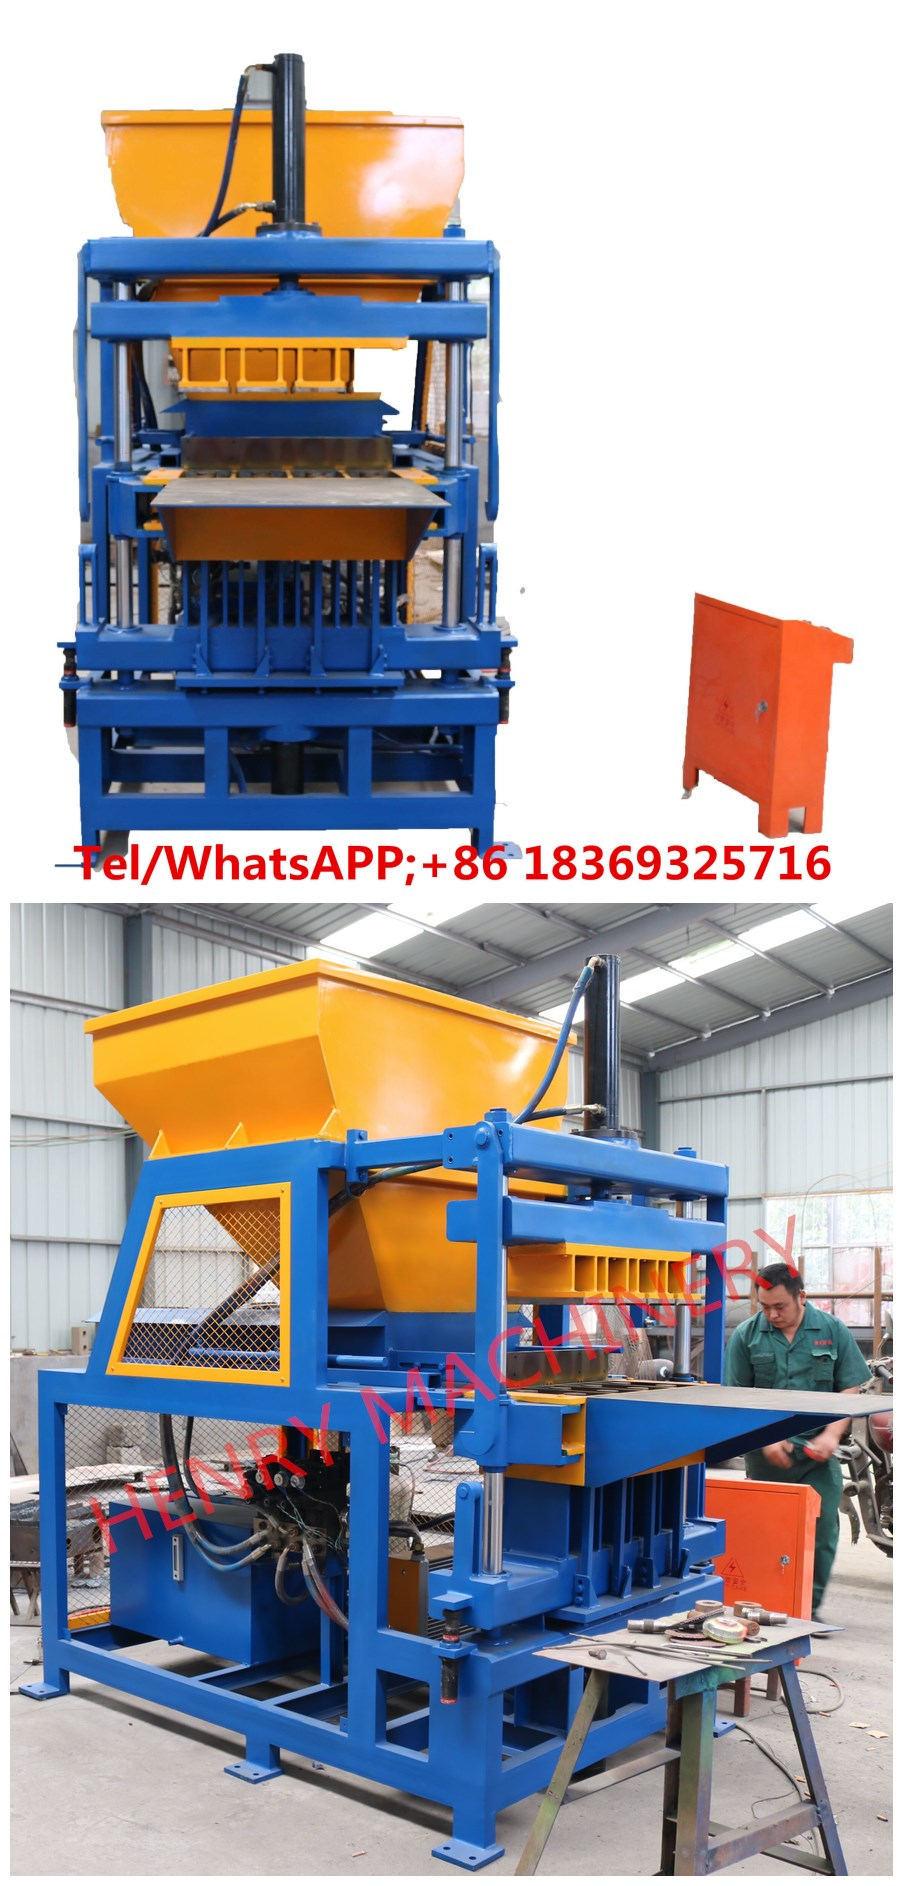 Equipped with Best Hr4-14 Clay Brick and Tile Making Machine, Brick Machine Manual Recycling Machine for Brick Price in Pakistan